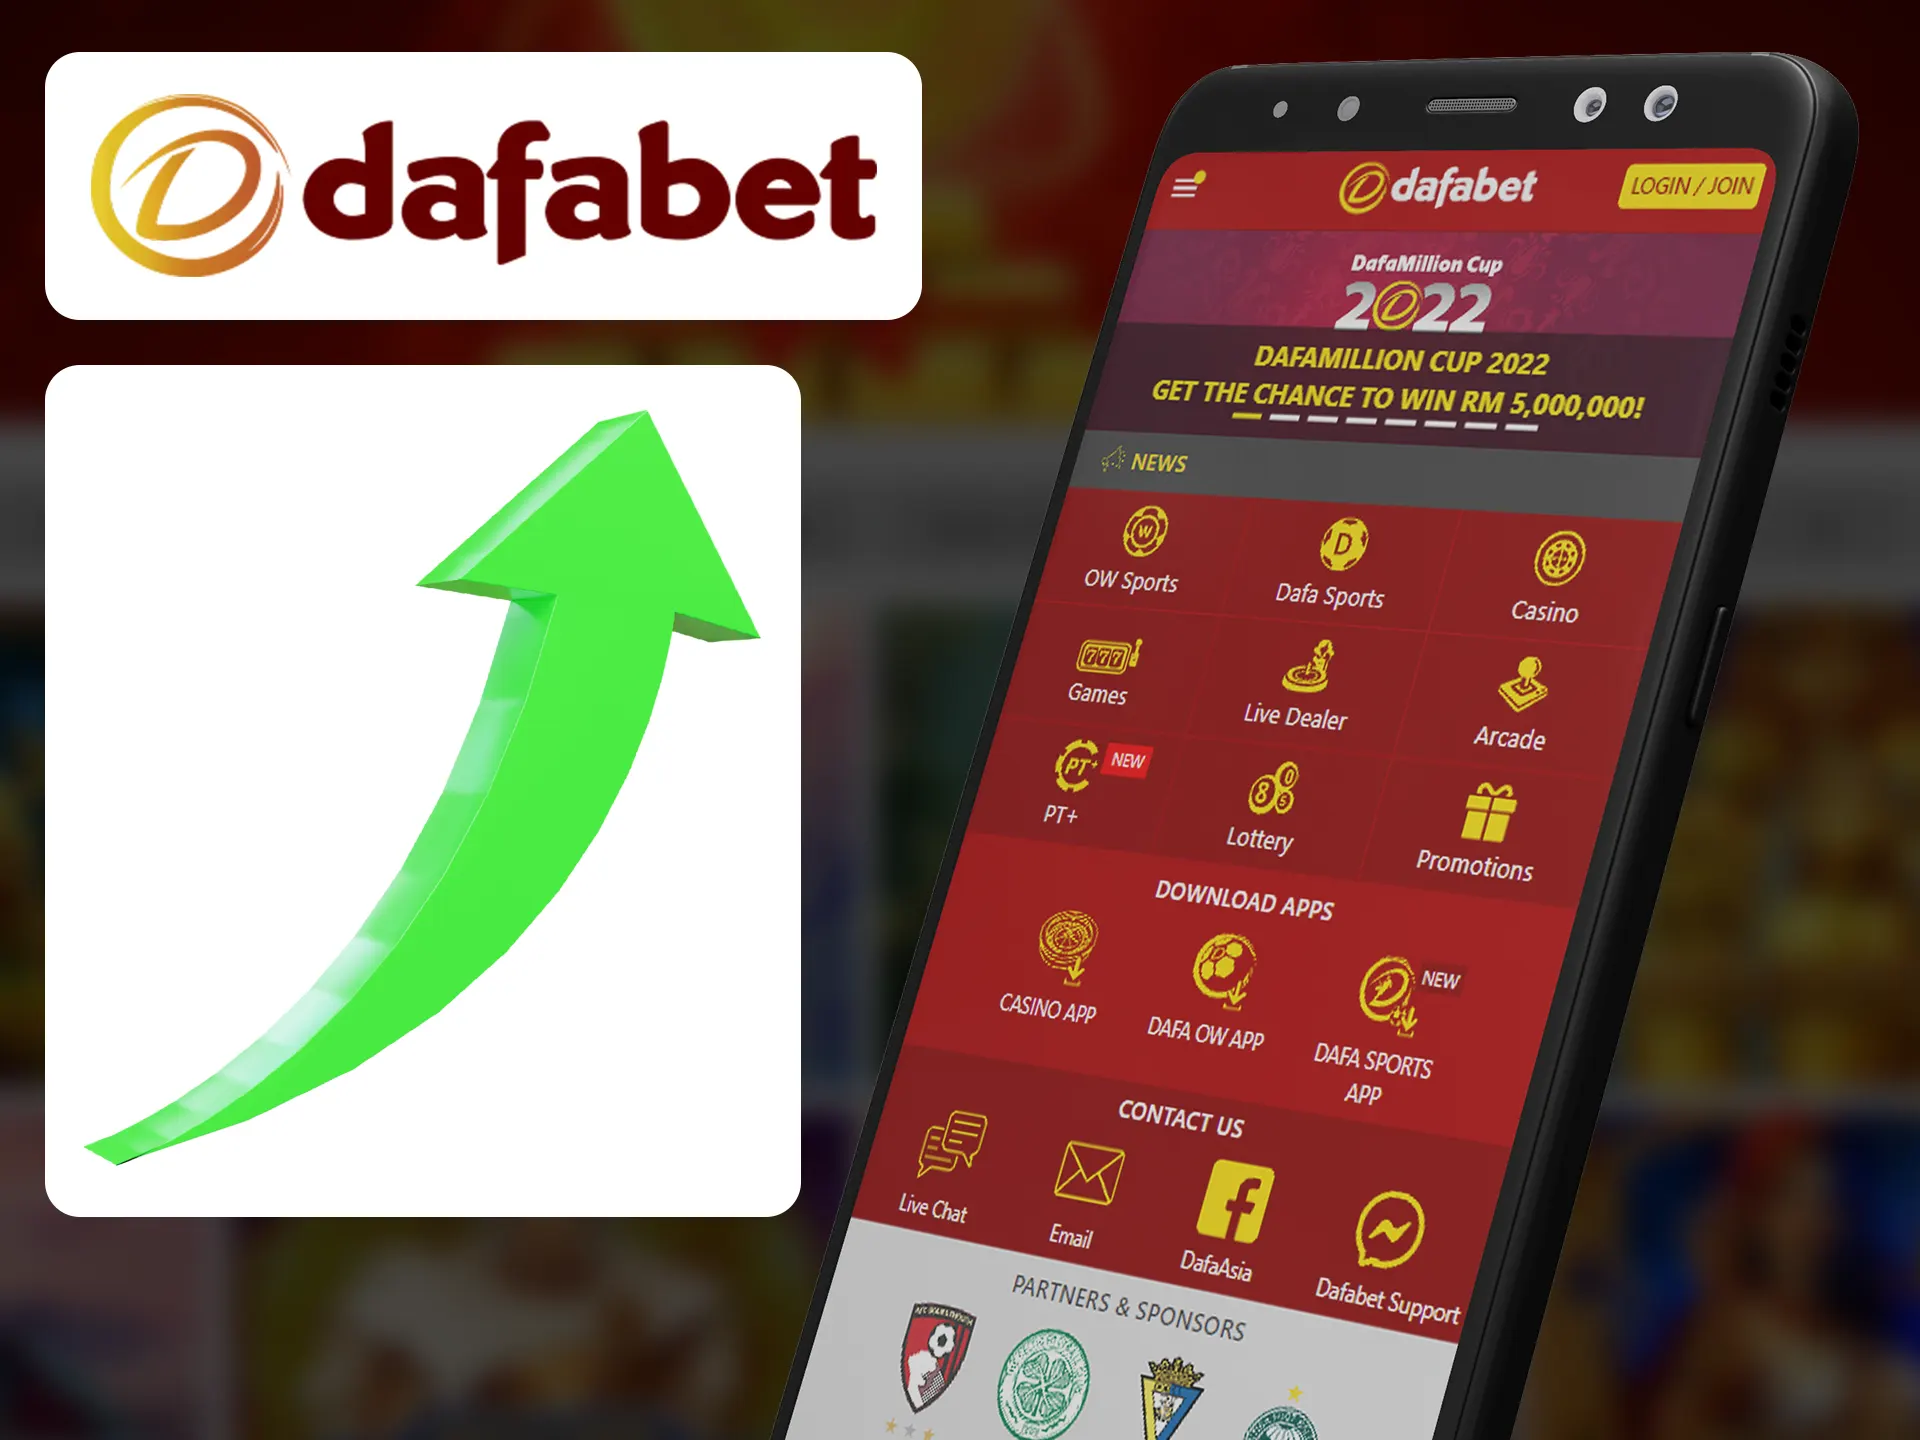 Dafabet app updates automatically when you logging in.